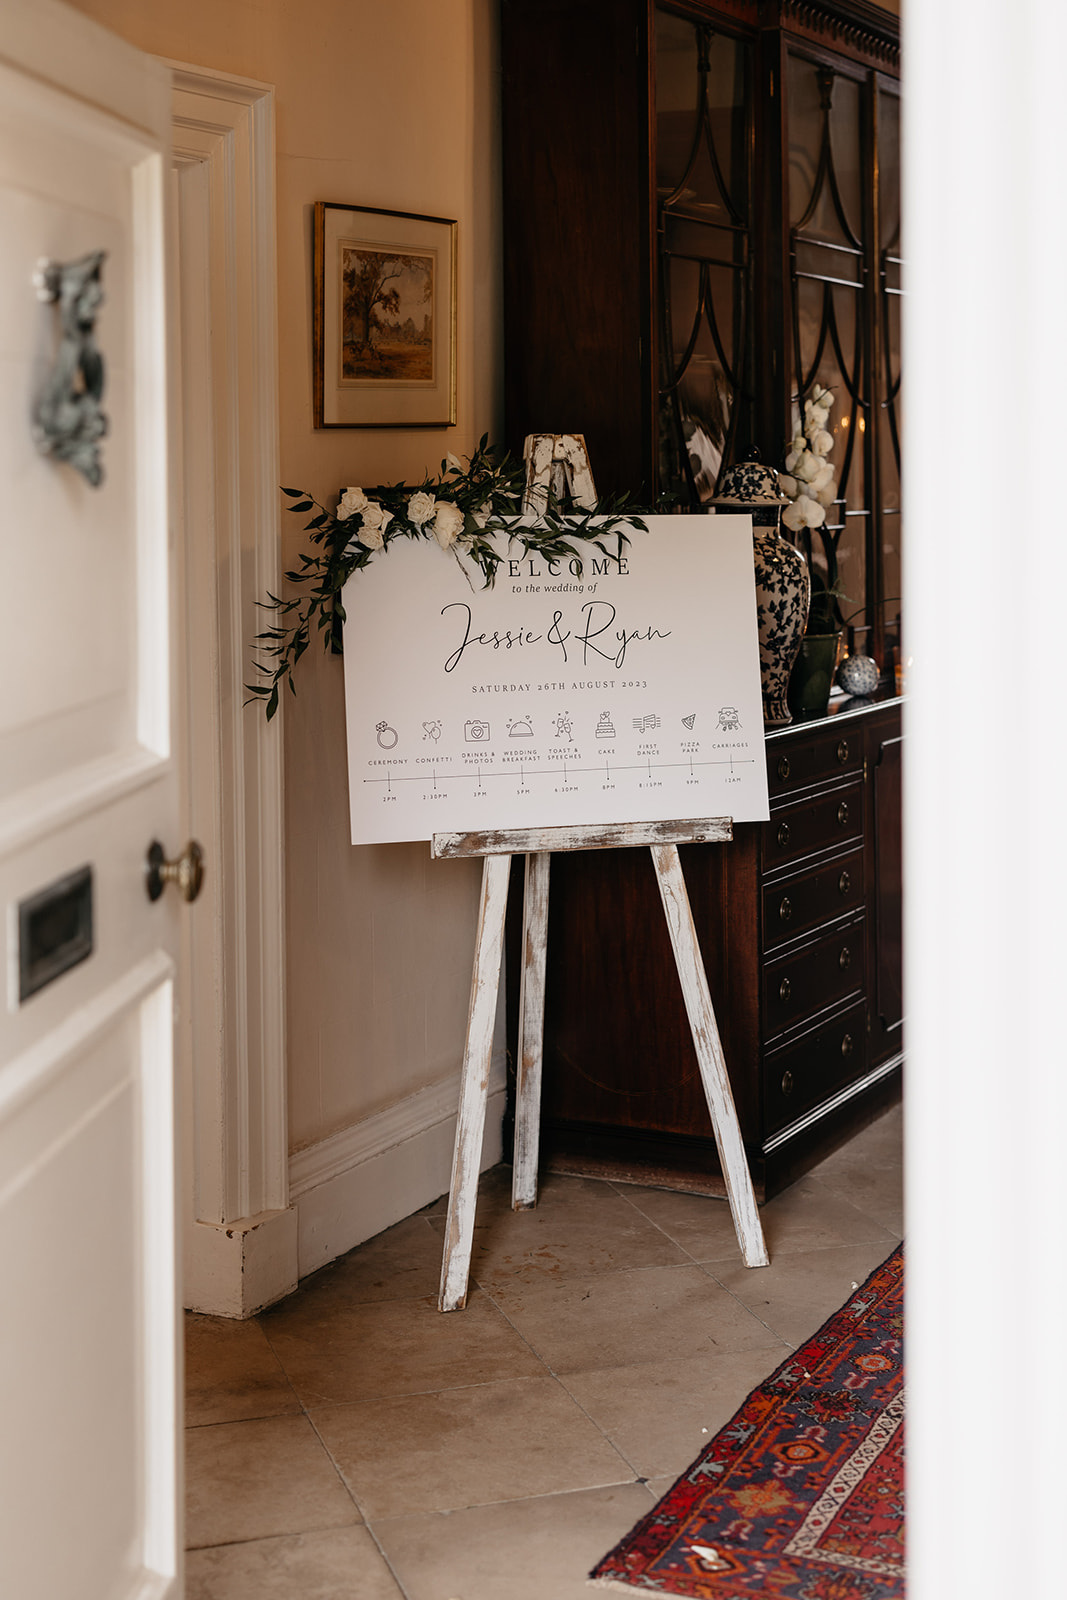 A wedding sign stands propped on an easel in a hallway that has a flagstone floor and red rugs on the floor